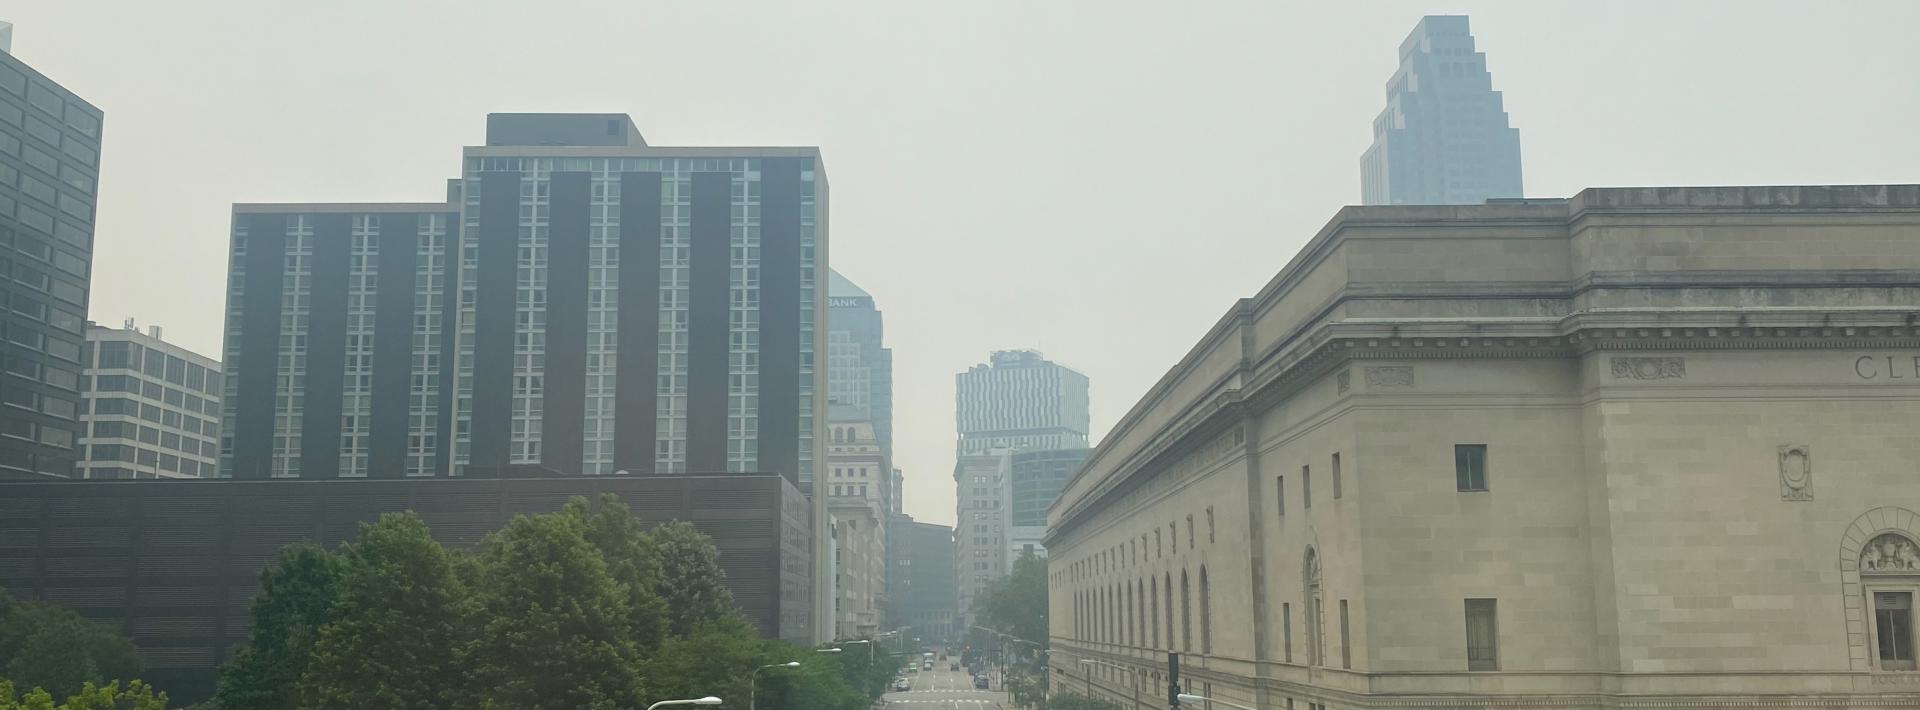 Cleveland Air Quality from Forest Fires